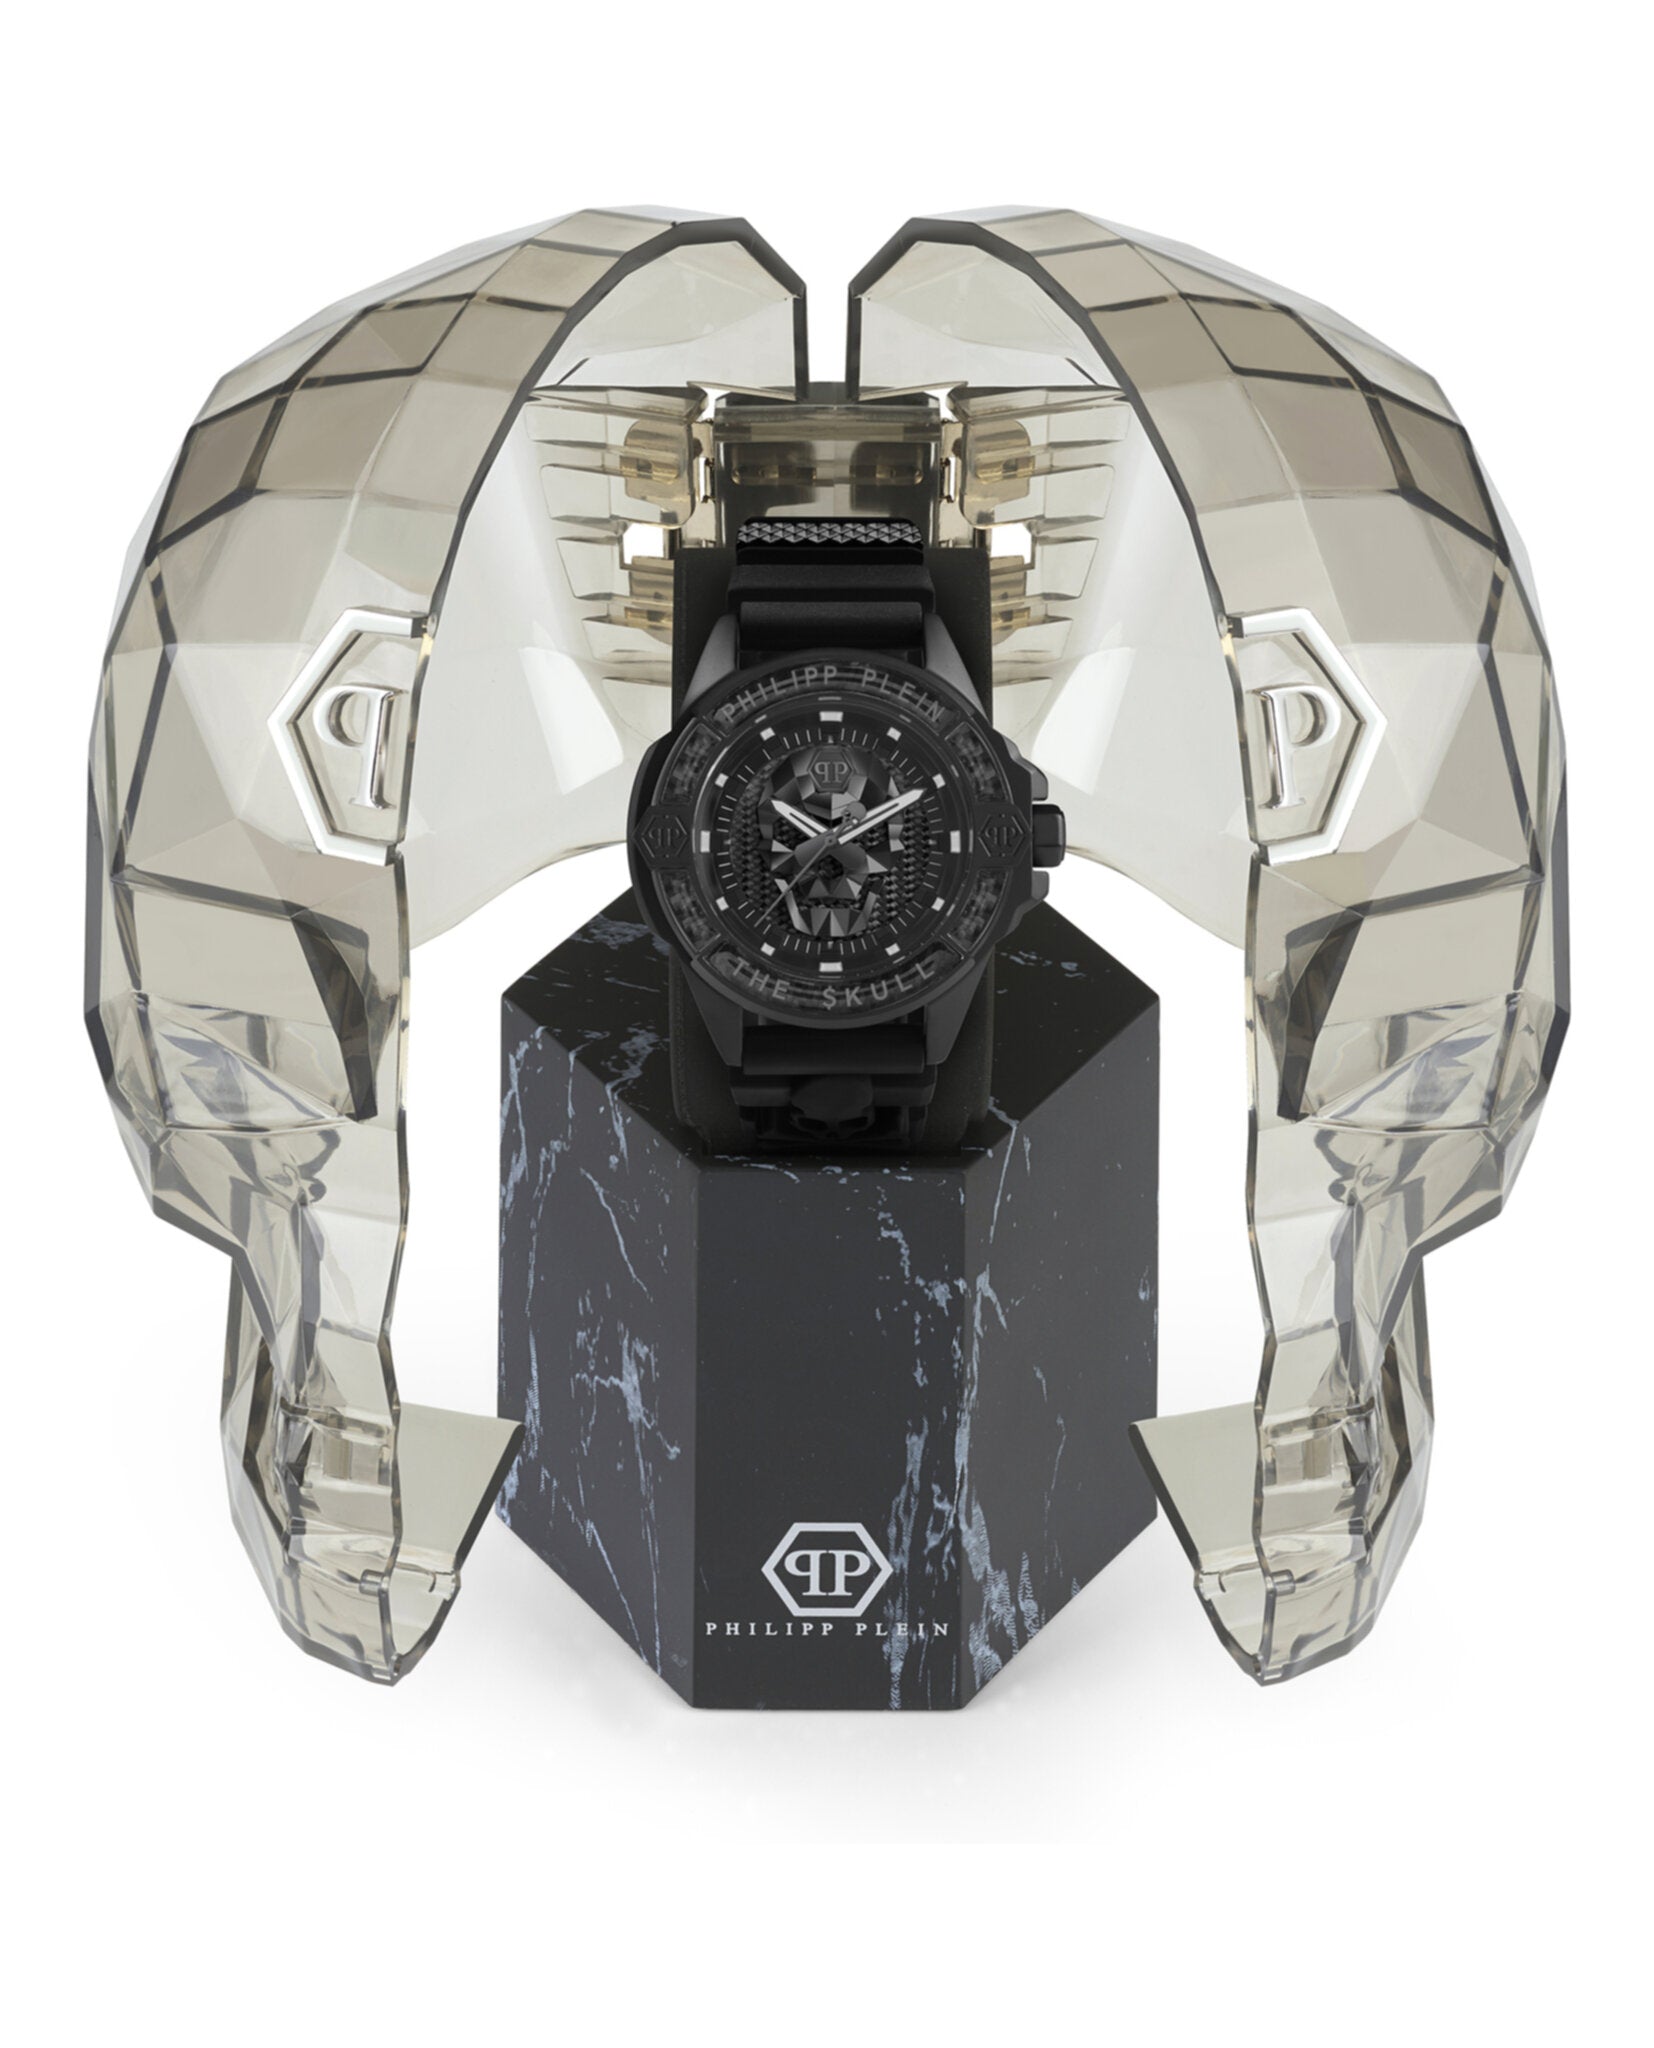 The $kull Carbon Fiber Silicone Watch